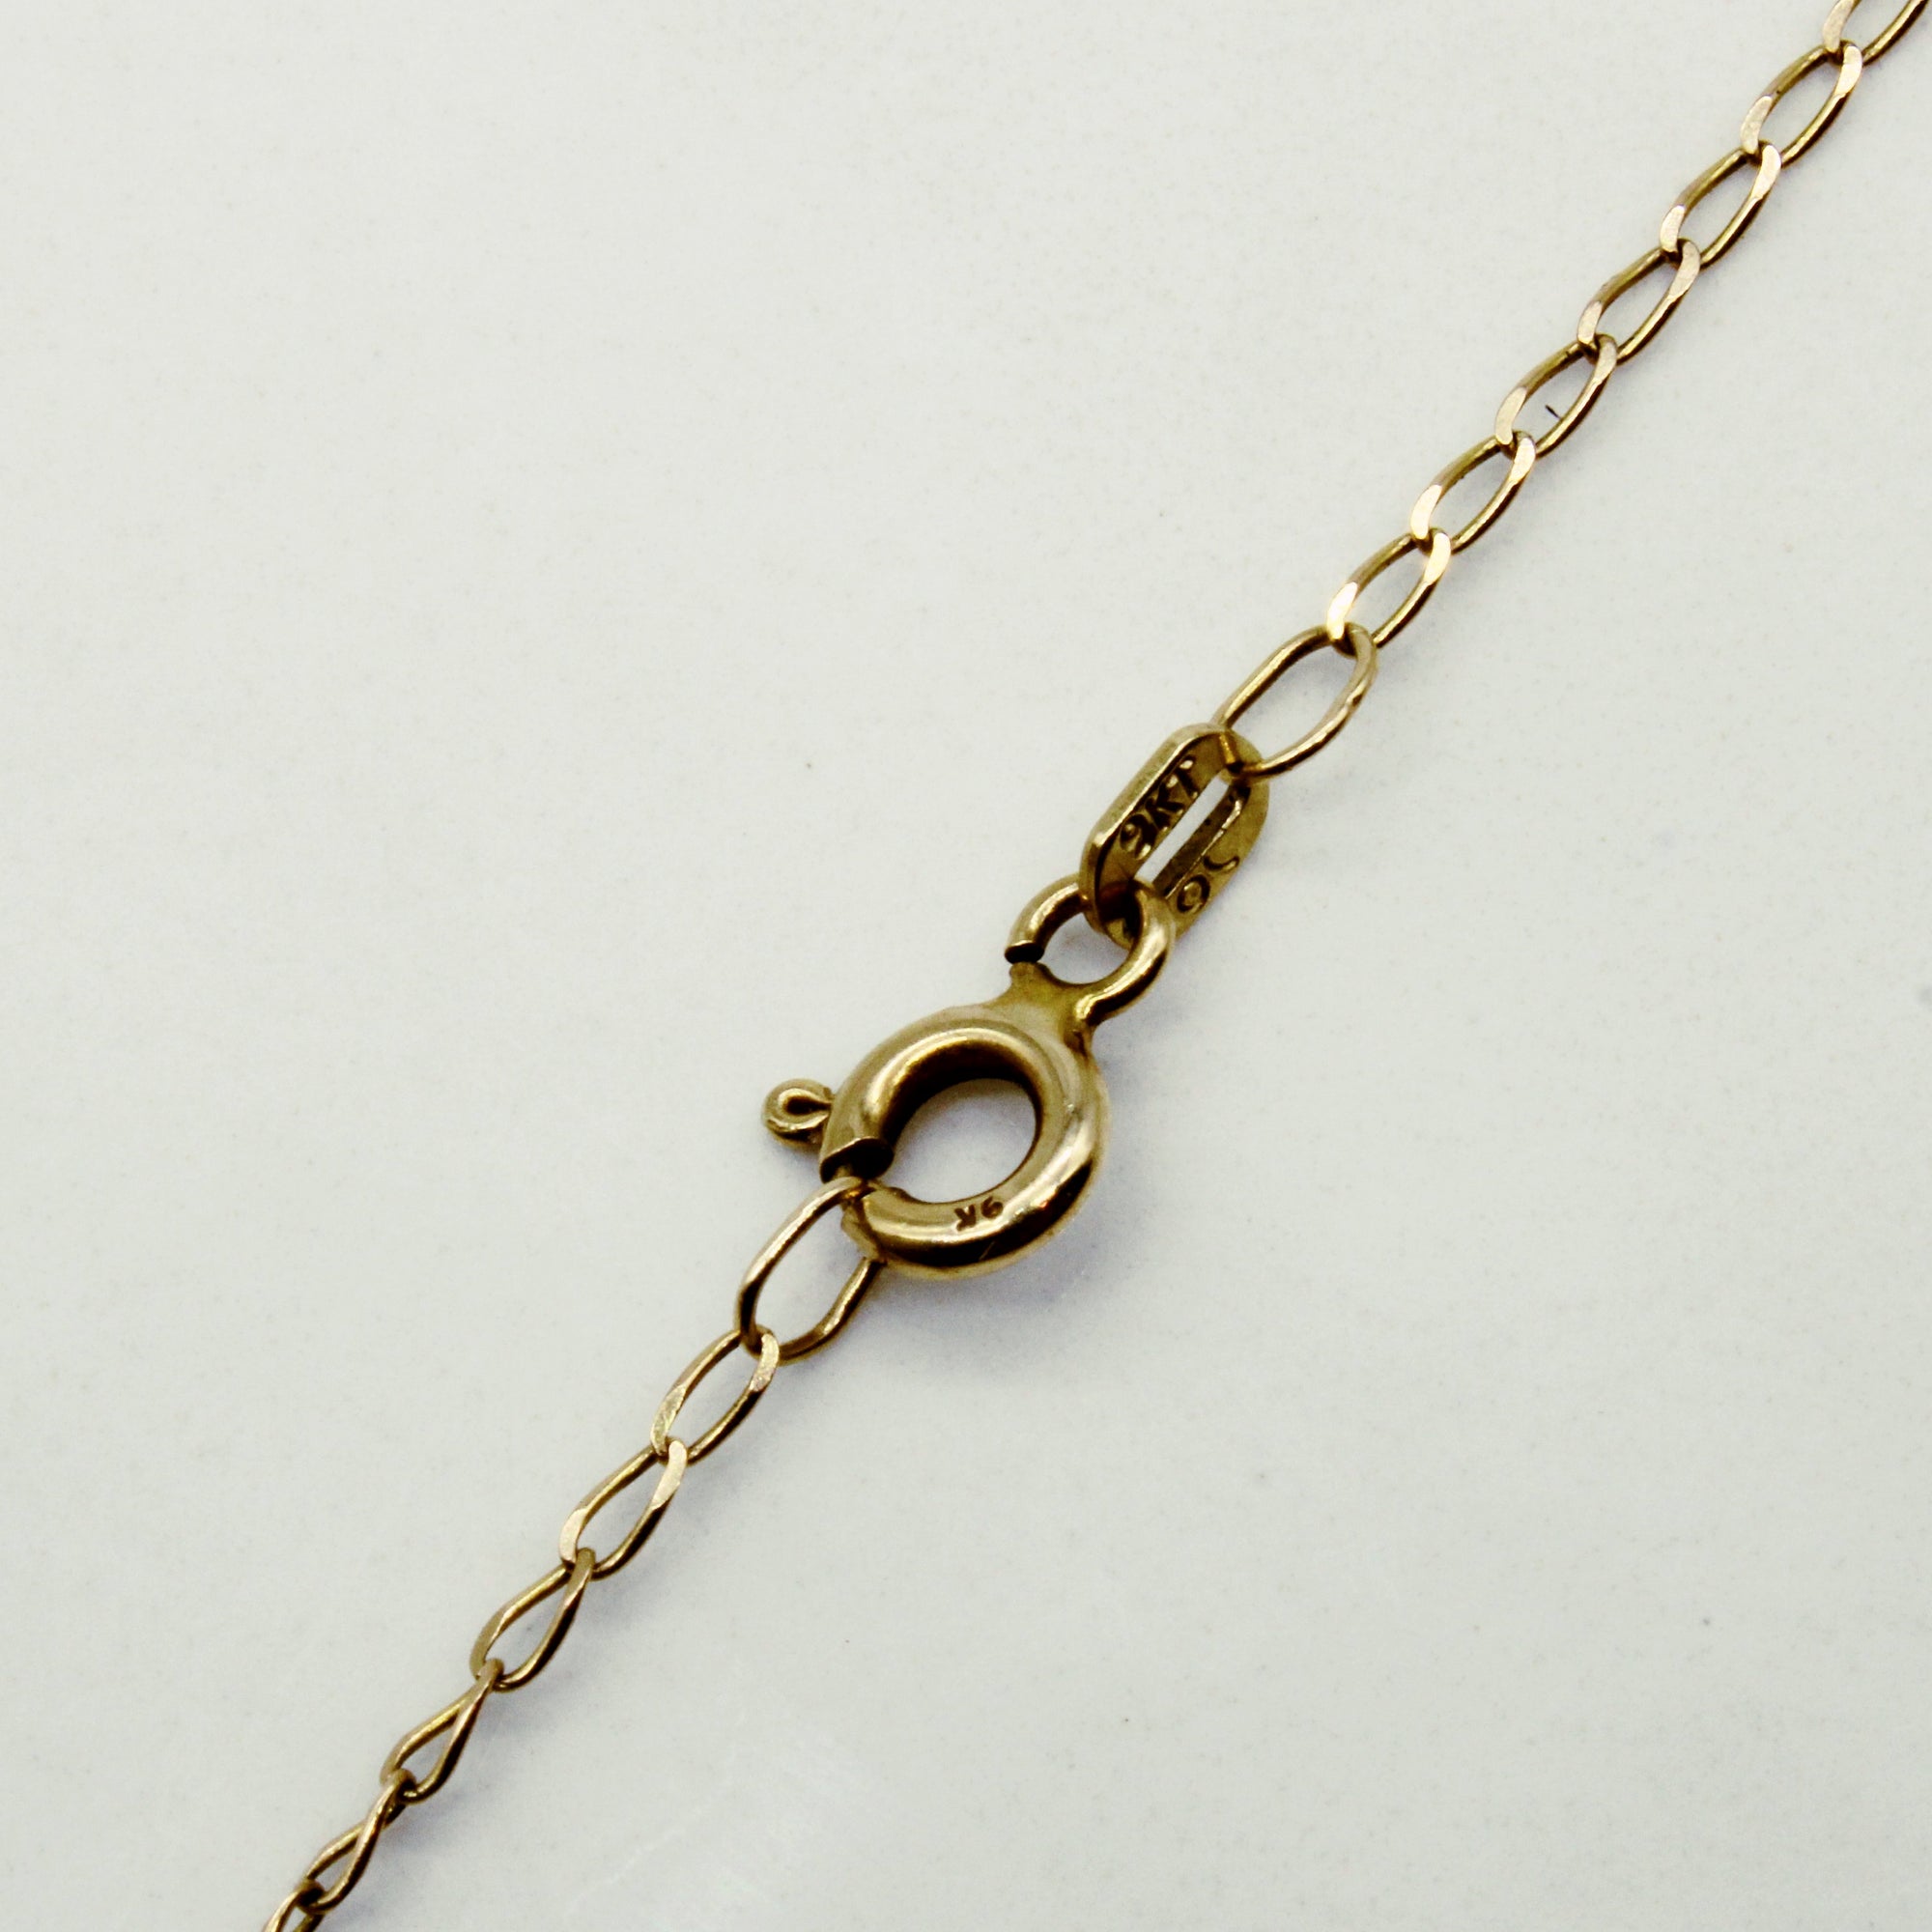 9k Yellow Gold Necklace | 20